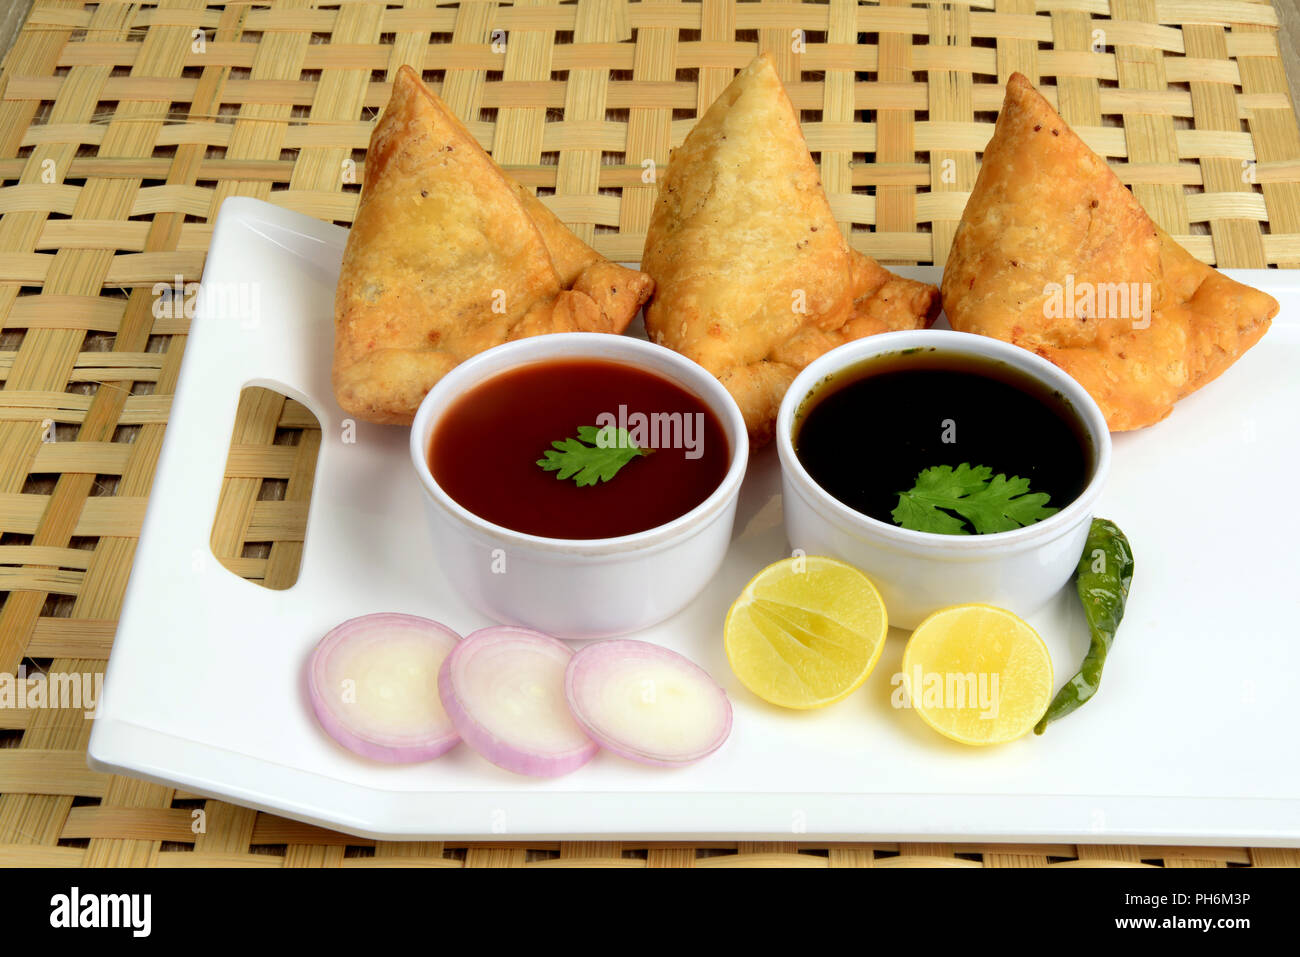 Punjabi Veg Samosa with onion and lemon slices with green chili and chutney on wooden background, samosa is a popular street food in India Stock Photo